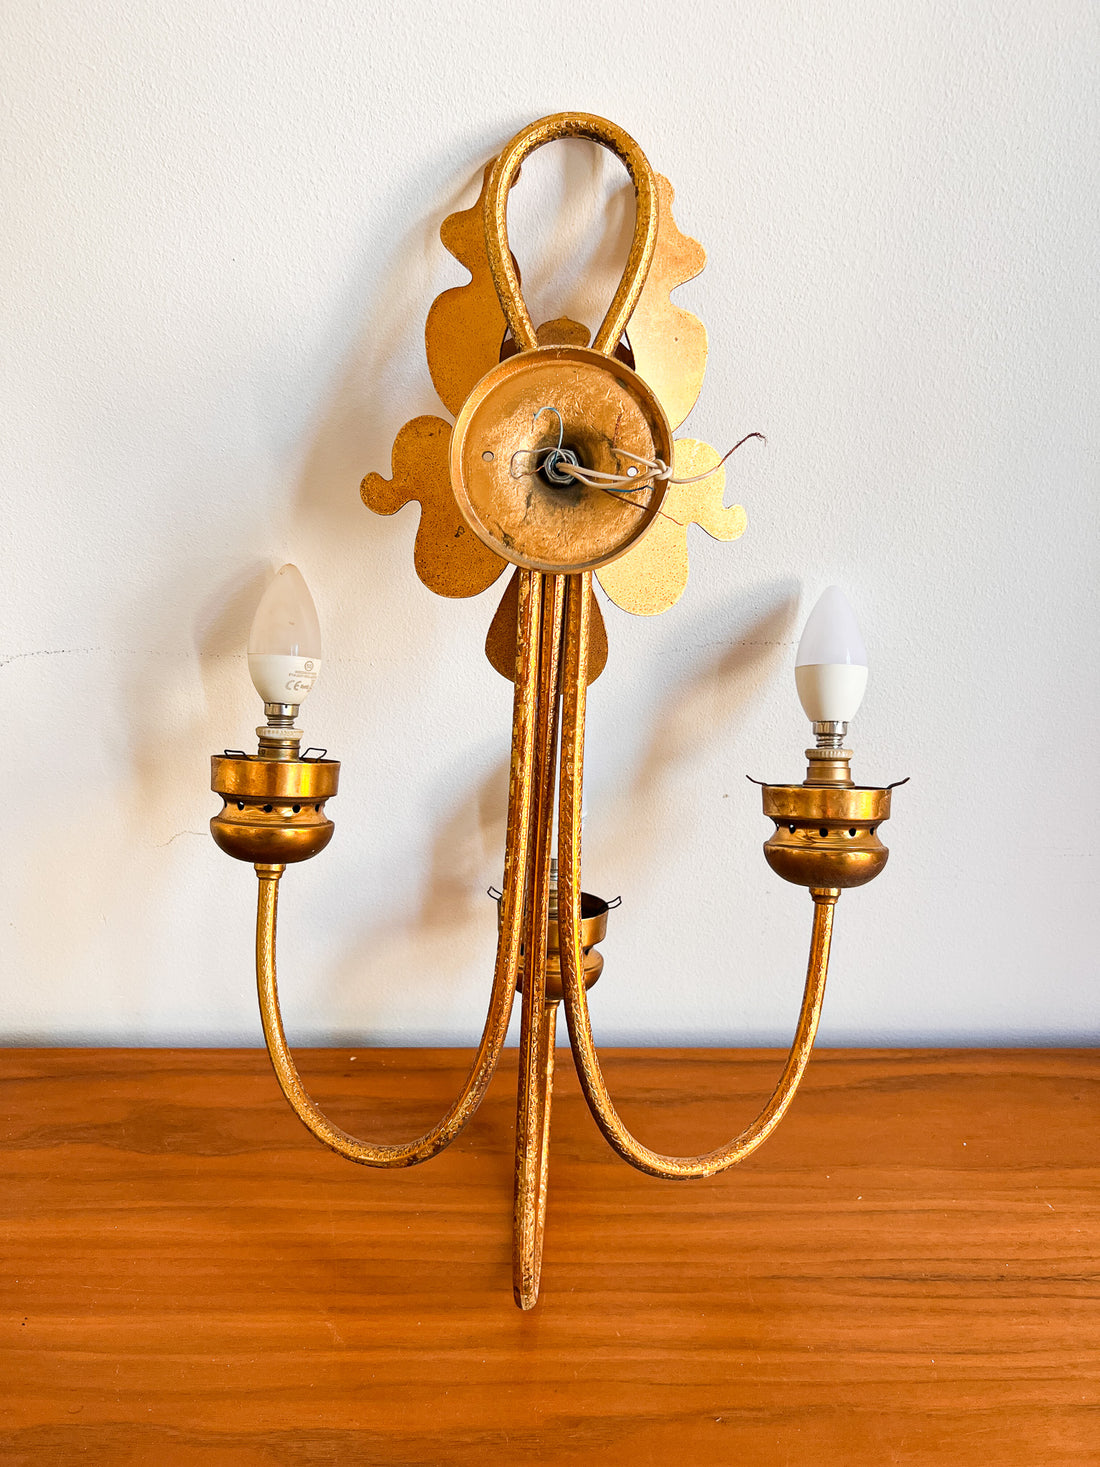 Brass Wall Sconce Lamp